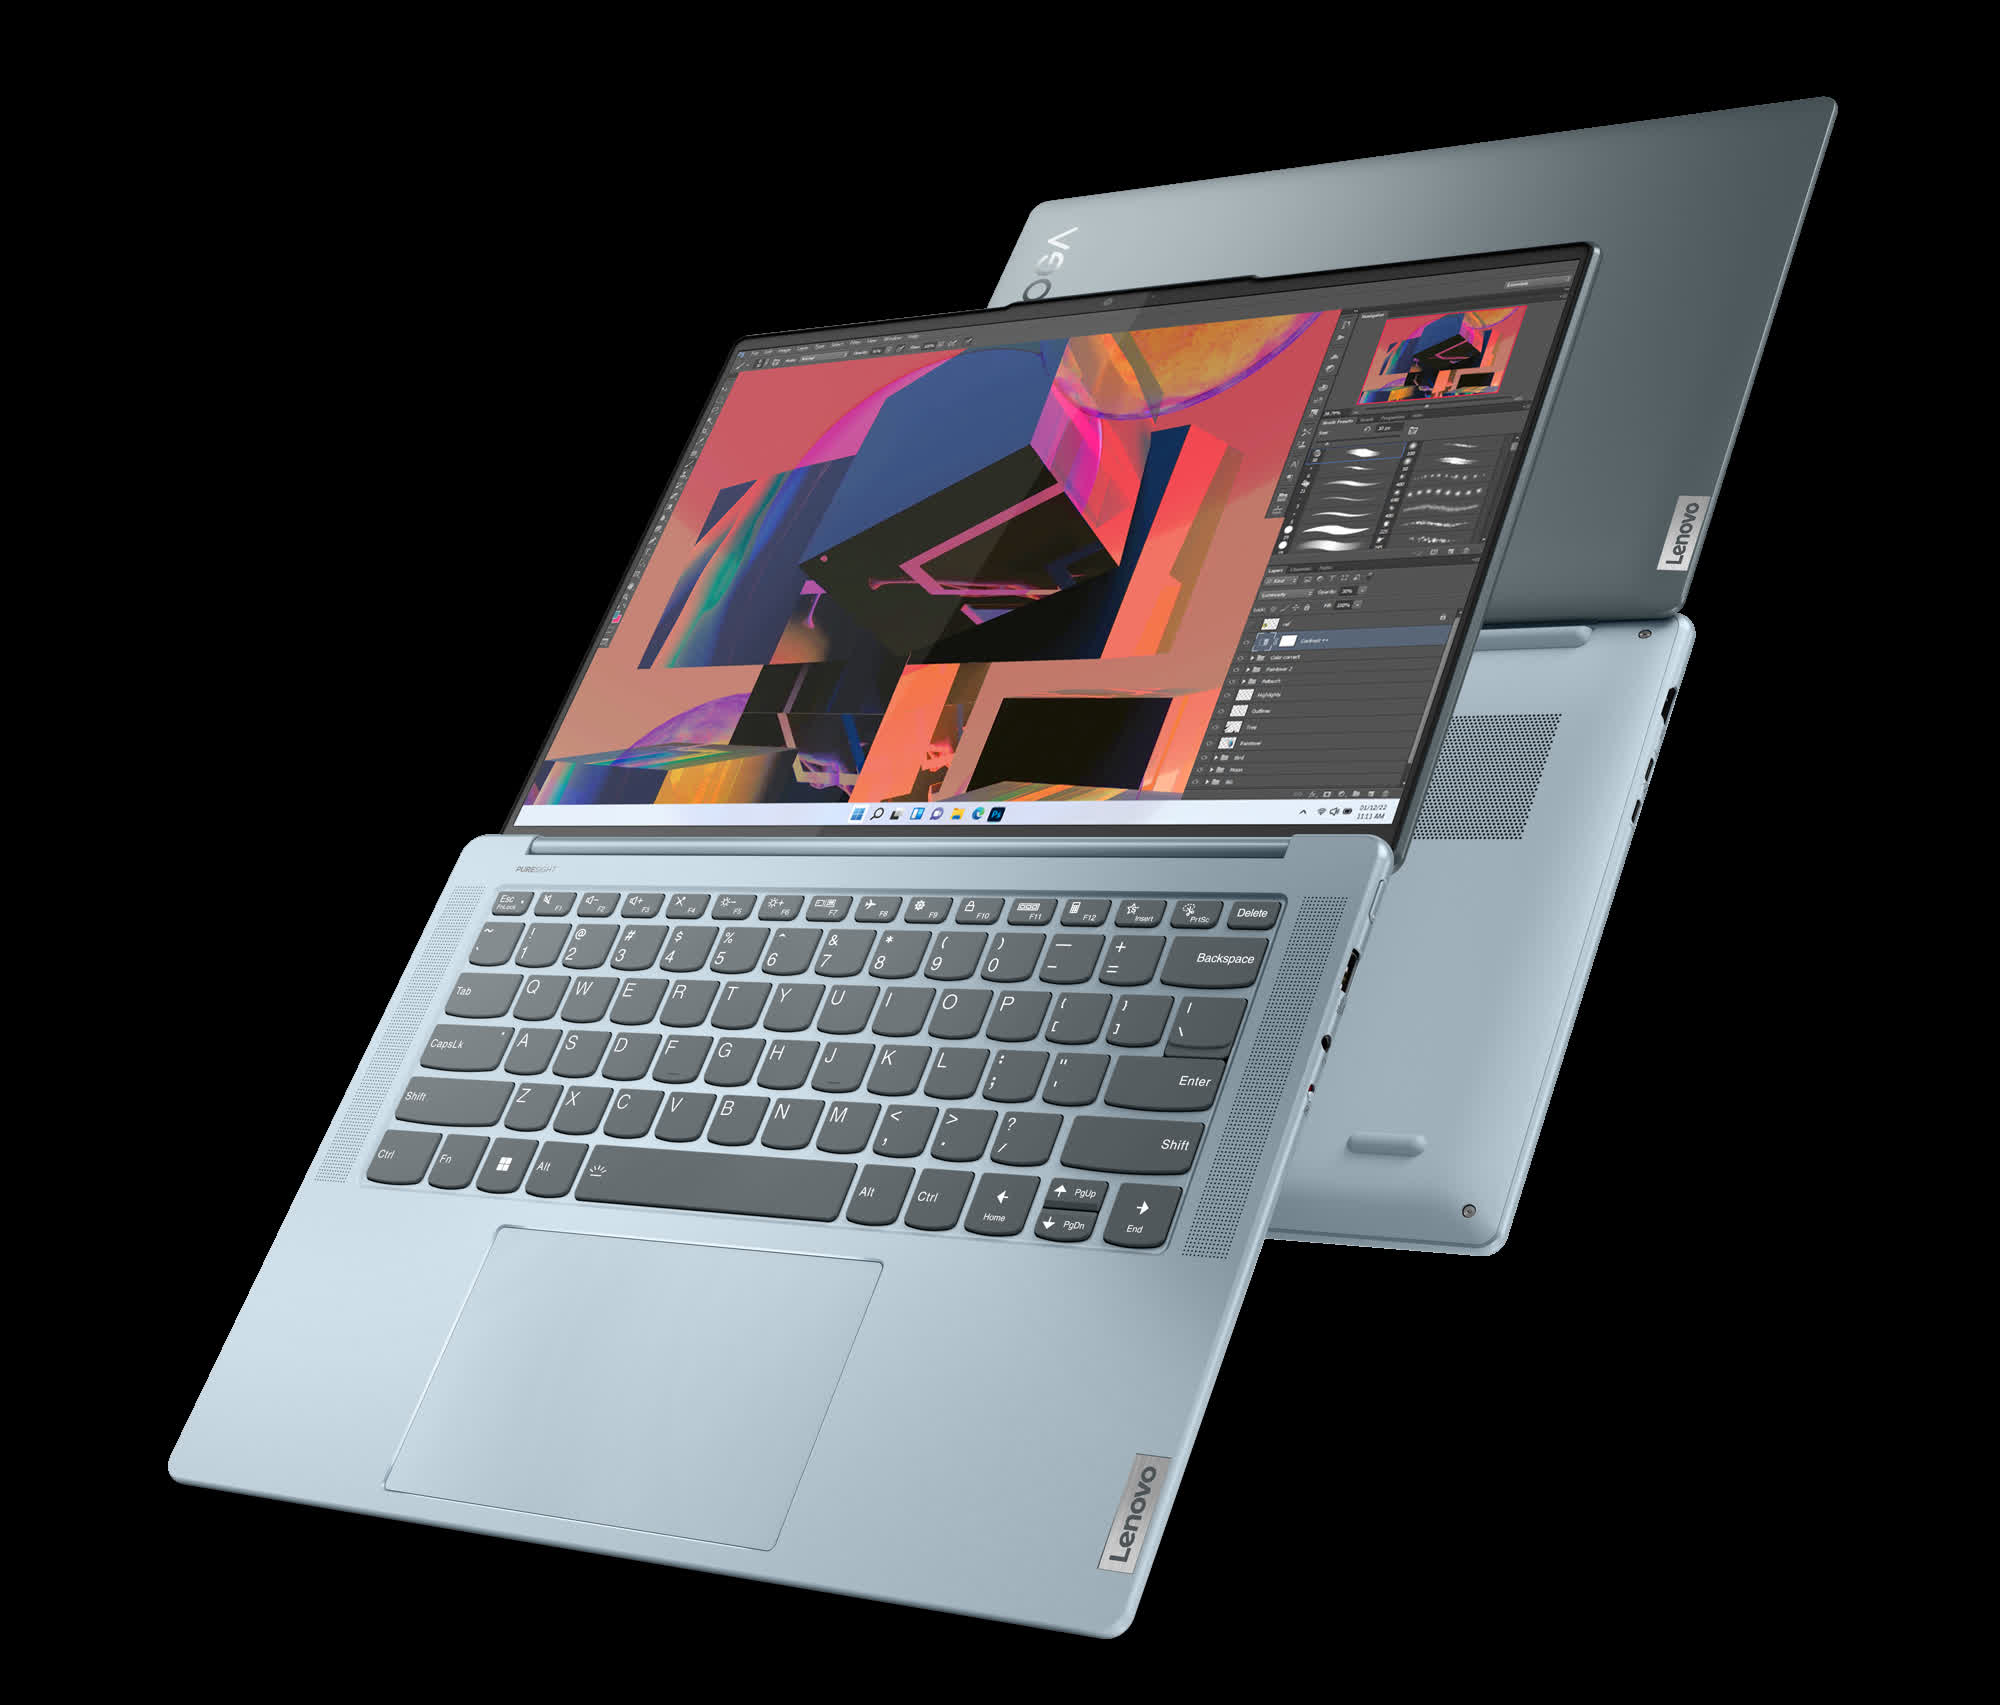 Lenovo to launch new 'Slim' notebooks in June, featuring carbon or glass reinforcement